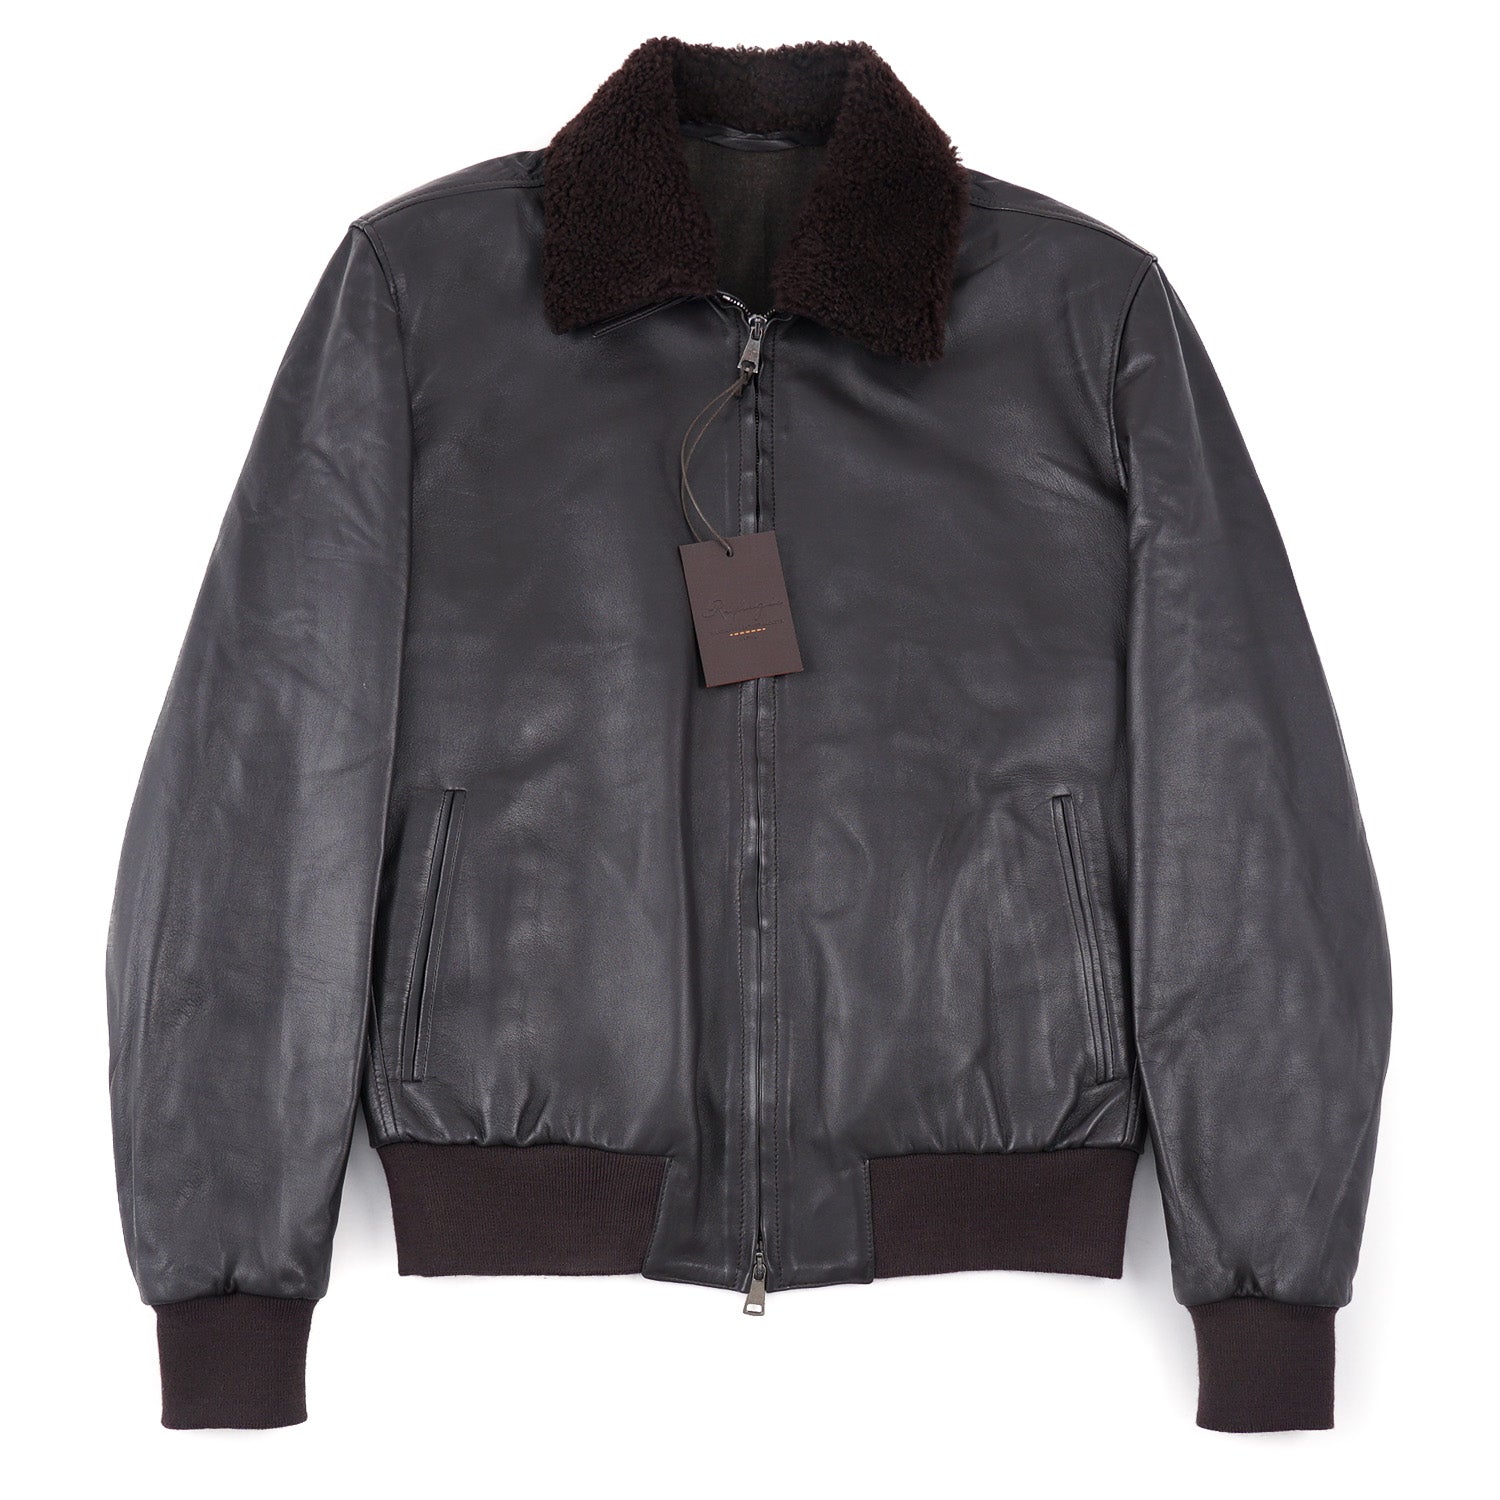 Rifugio Leather Jacket with Shearling Collar - Top Shelf Apparel